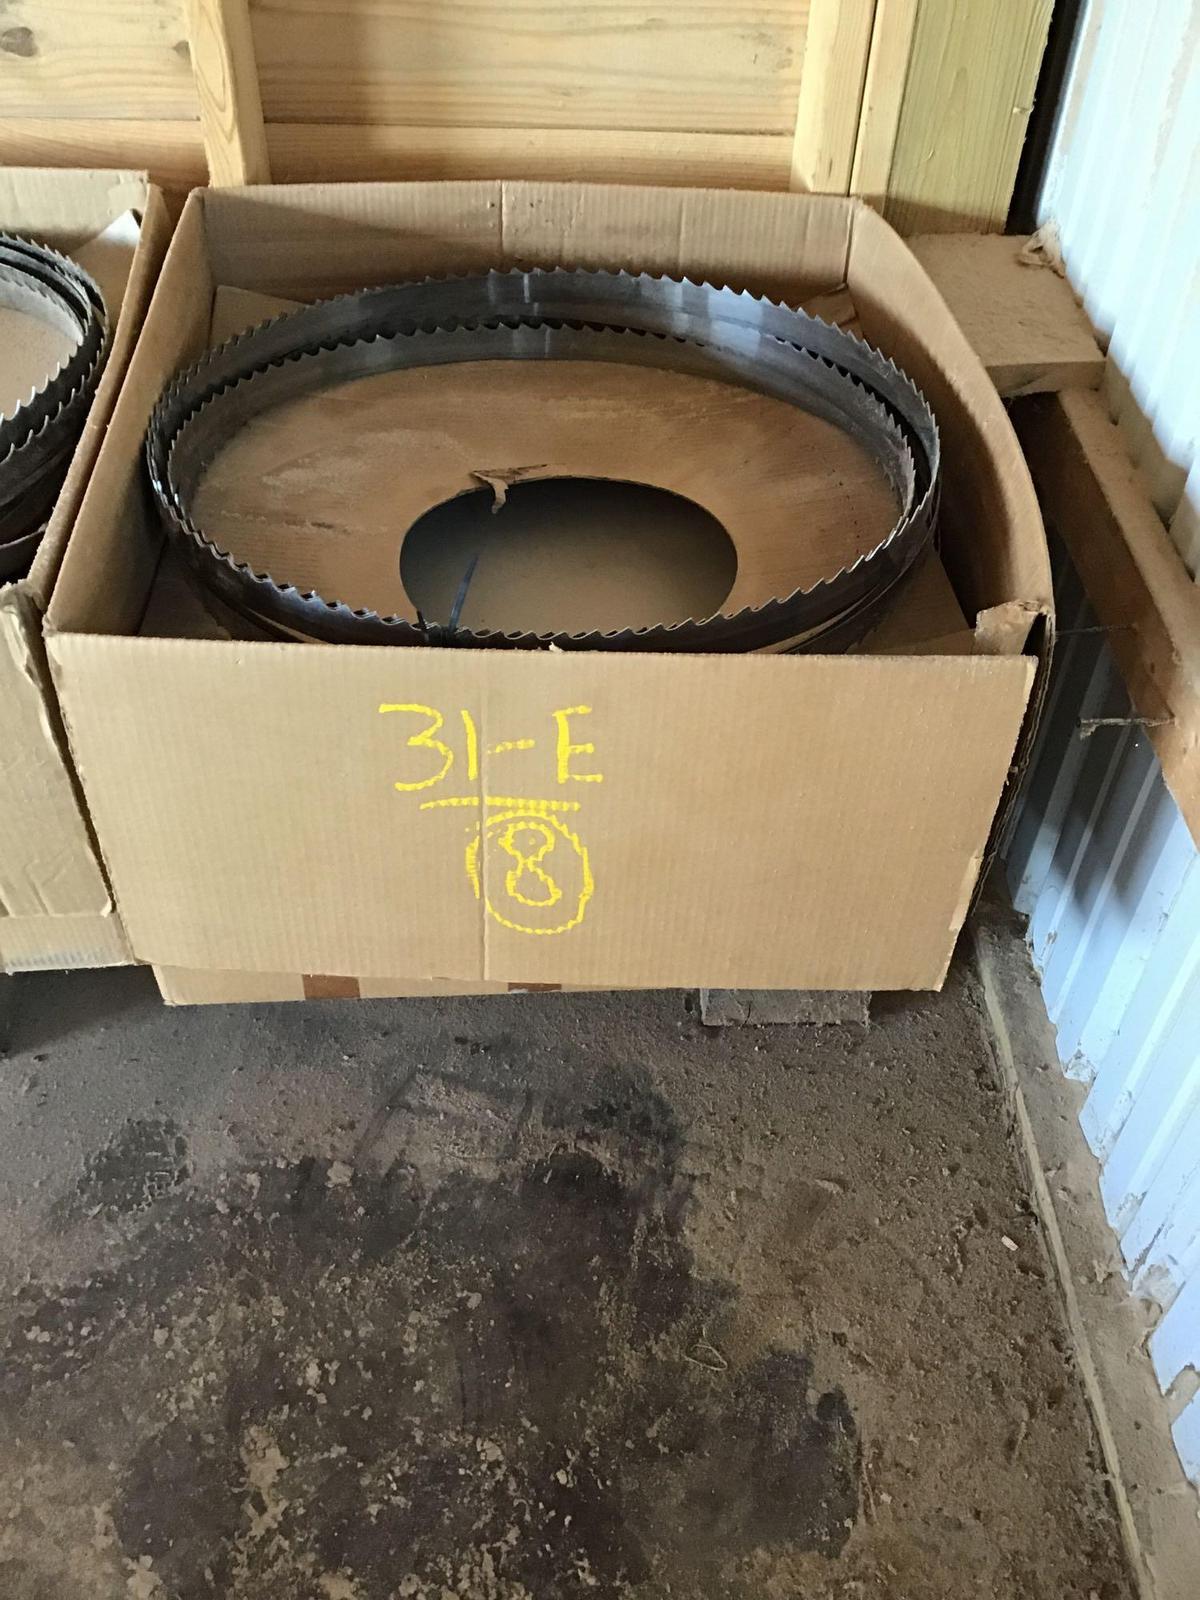 Bandsaw blades for Baker sawmill